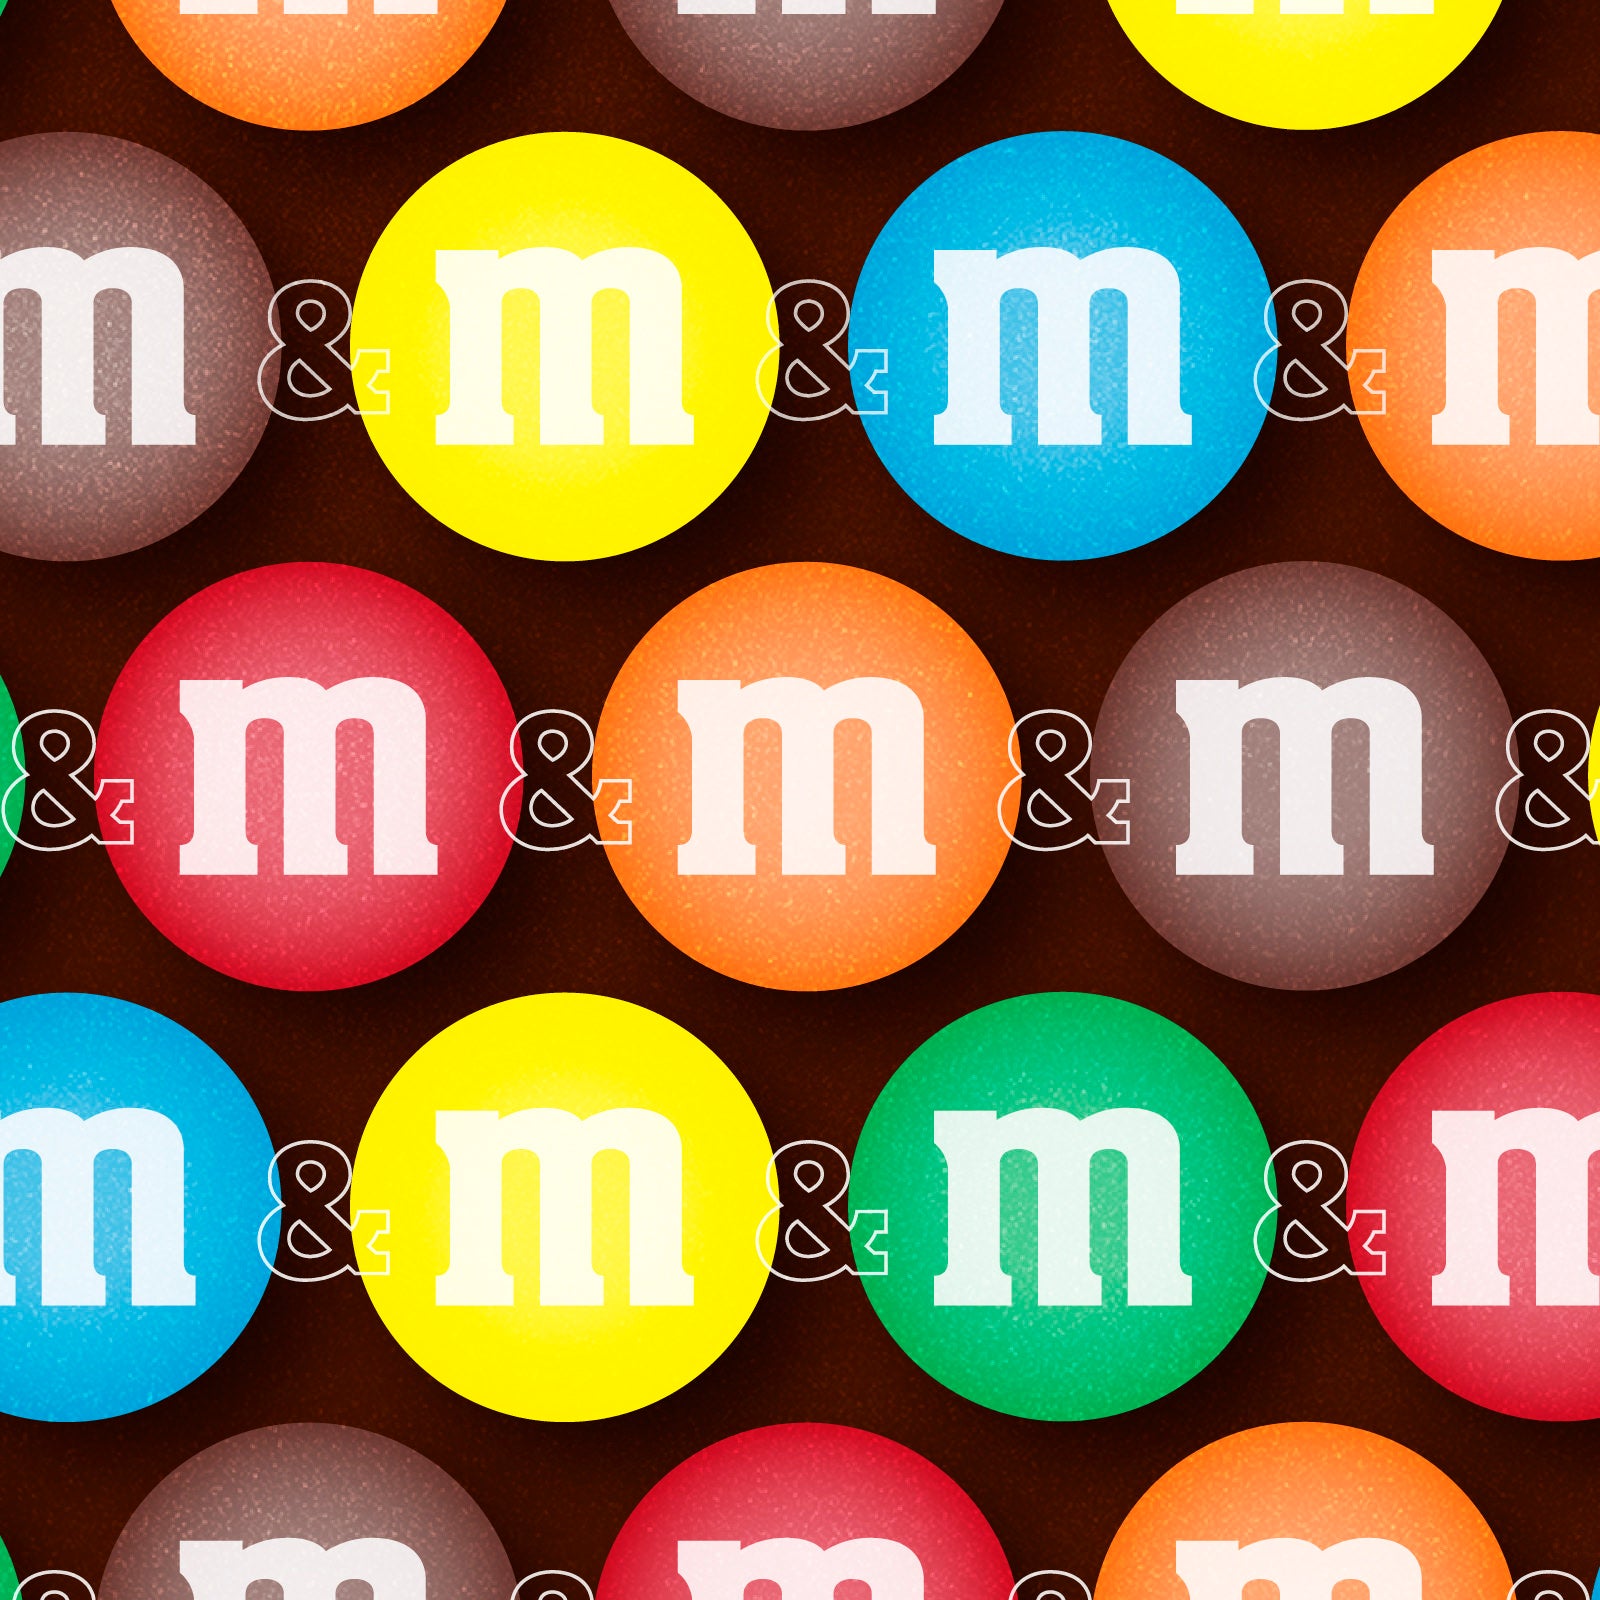 Every M&M's product i had rated : r/candy